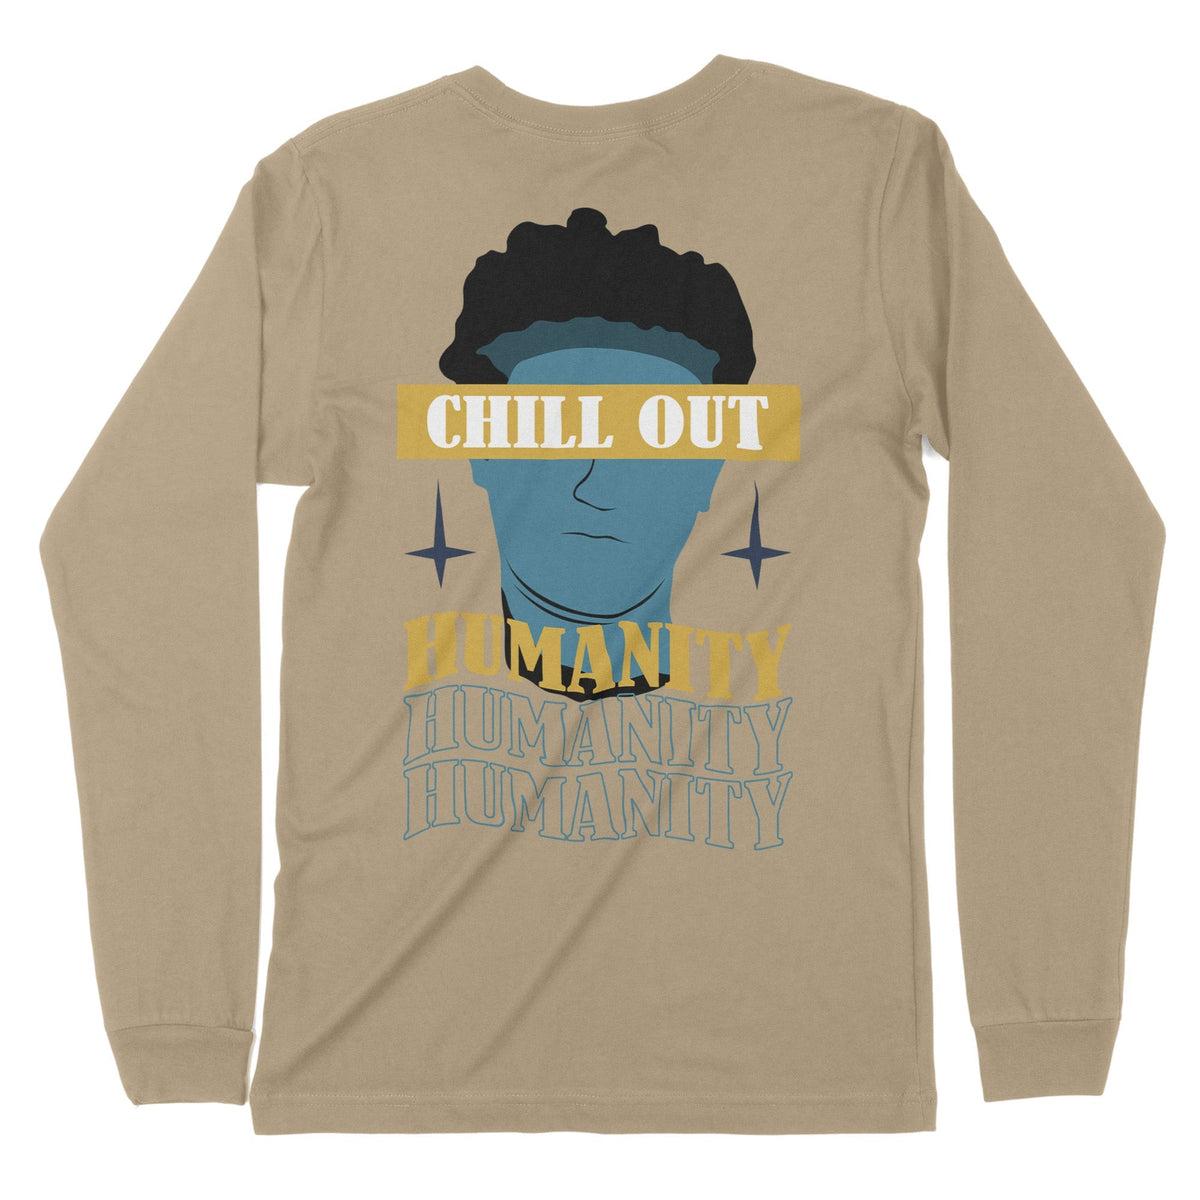 Chill Out Humanity | Back Print | Long-Sleeve T-Shirt | Premium Qualit Chroma Clothing